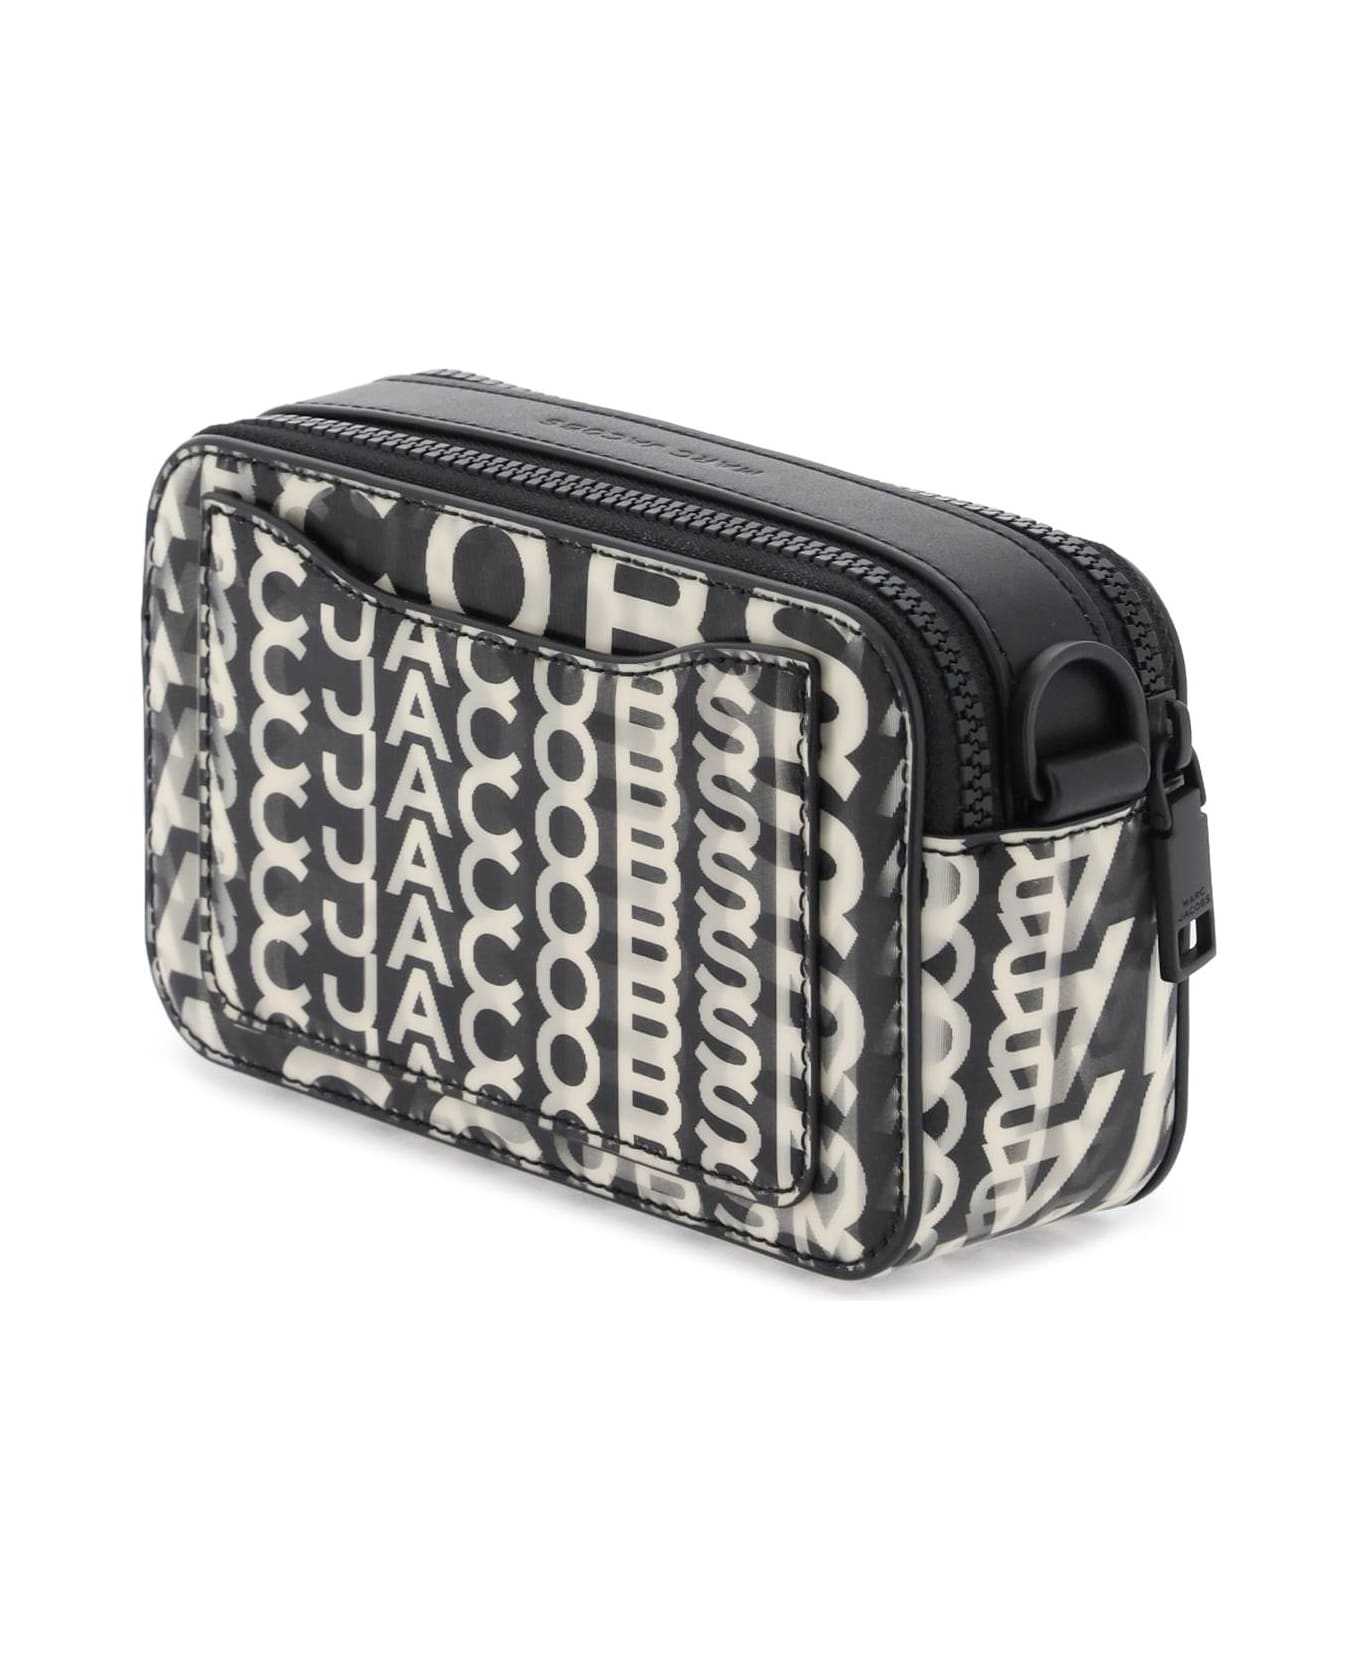 Marc Jacobs The Snapshot Bag With Lenticular Effect - BLACK WHITE (Black) ベルトバッグ